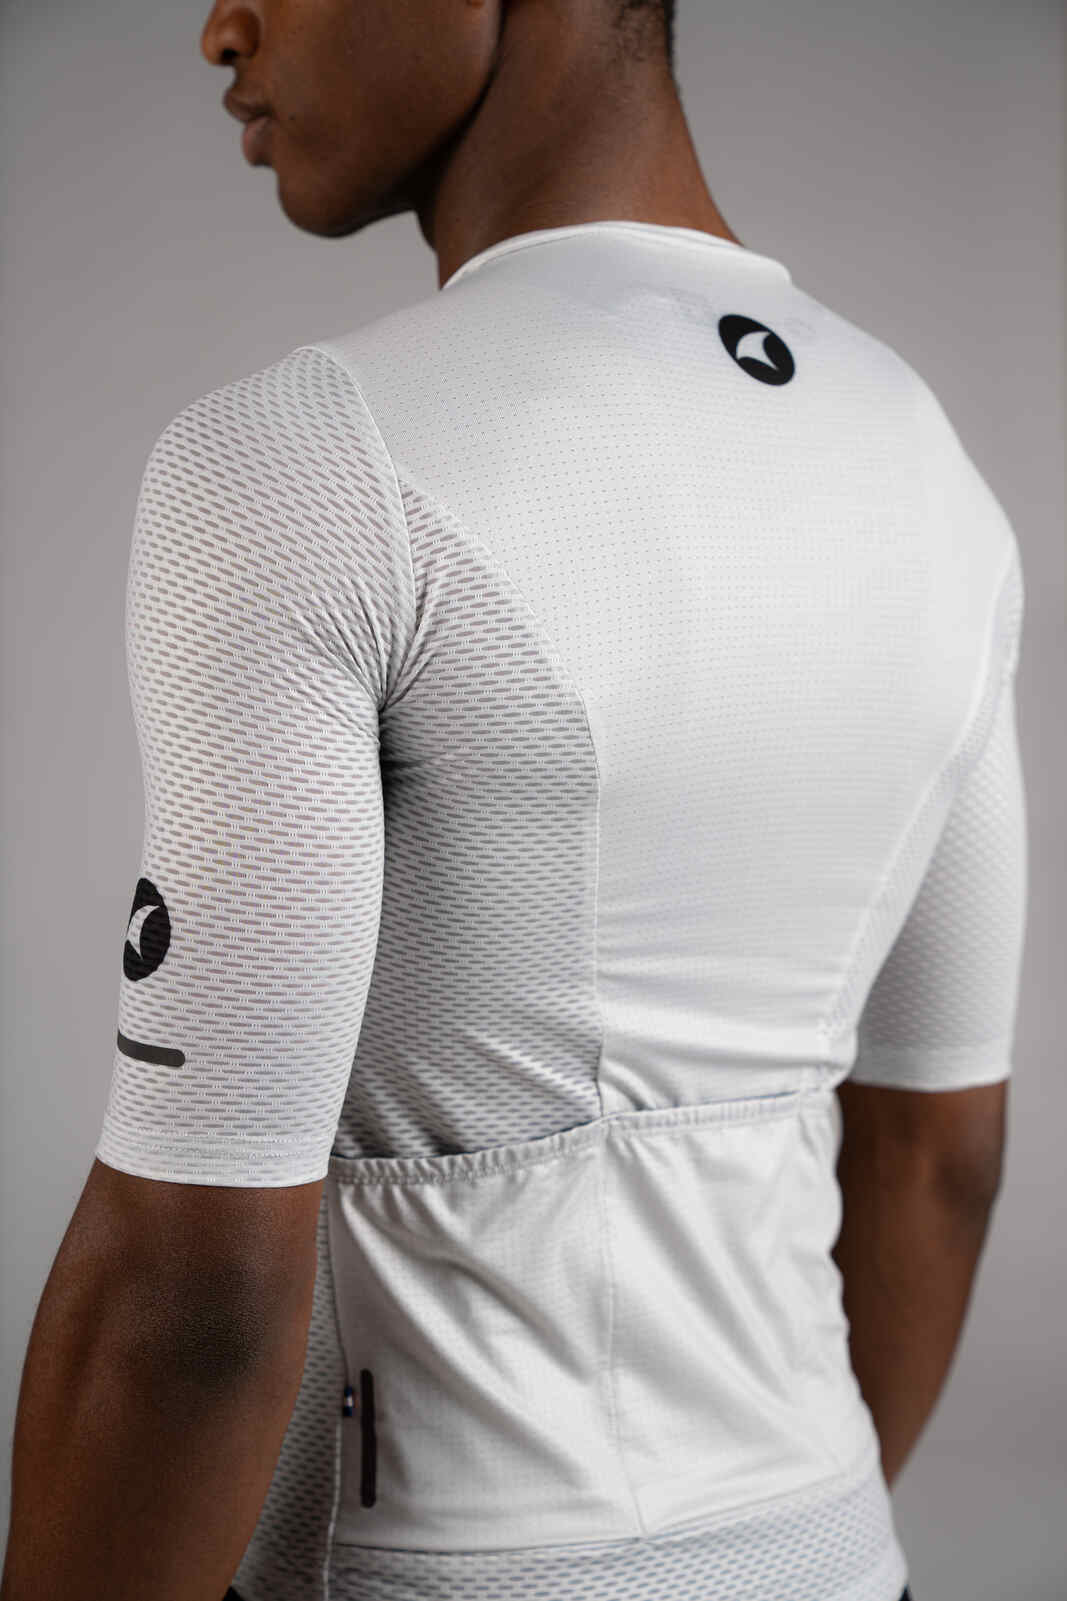 Men's White Mesh Cycling Jersey - Sleeve Close-Up